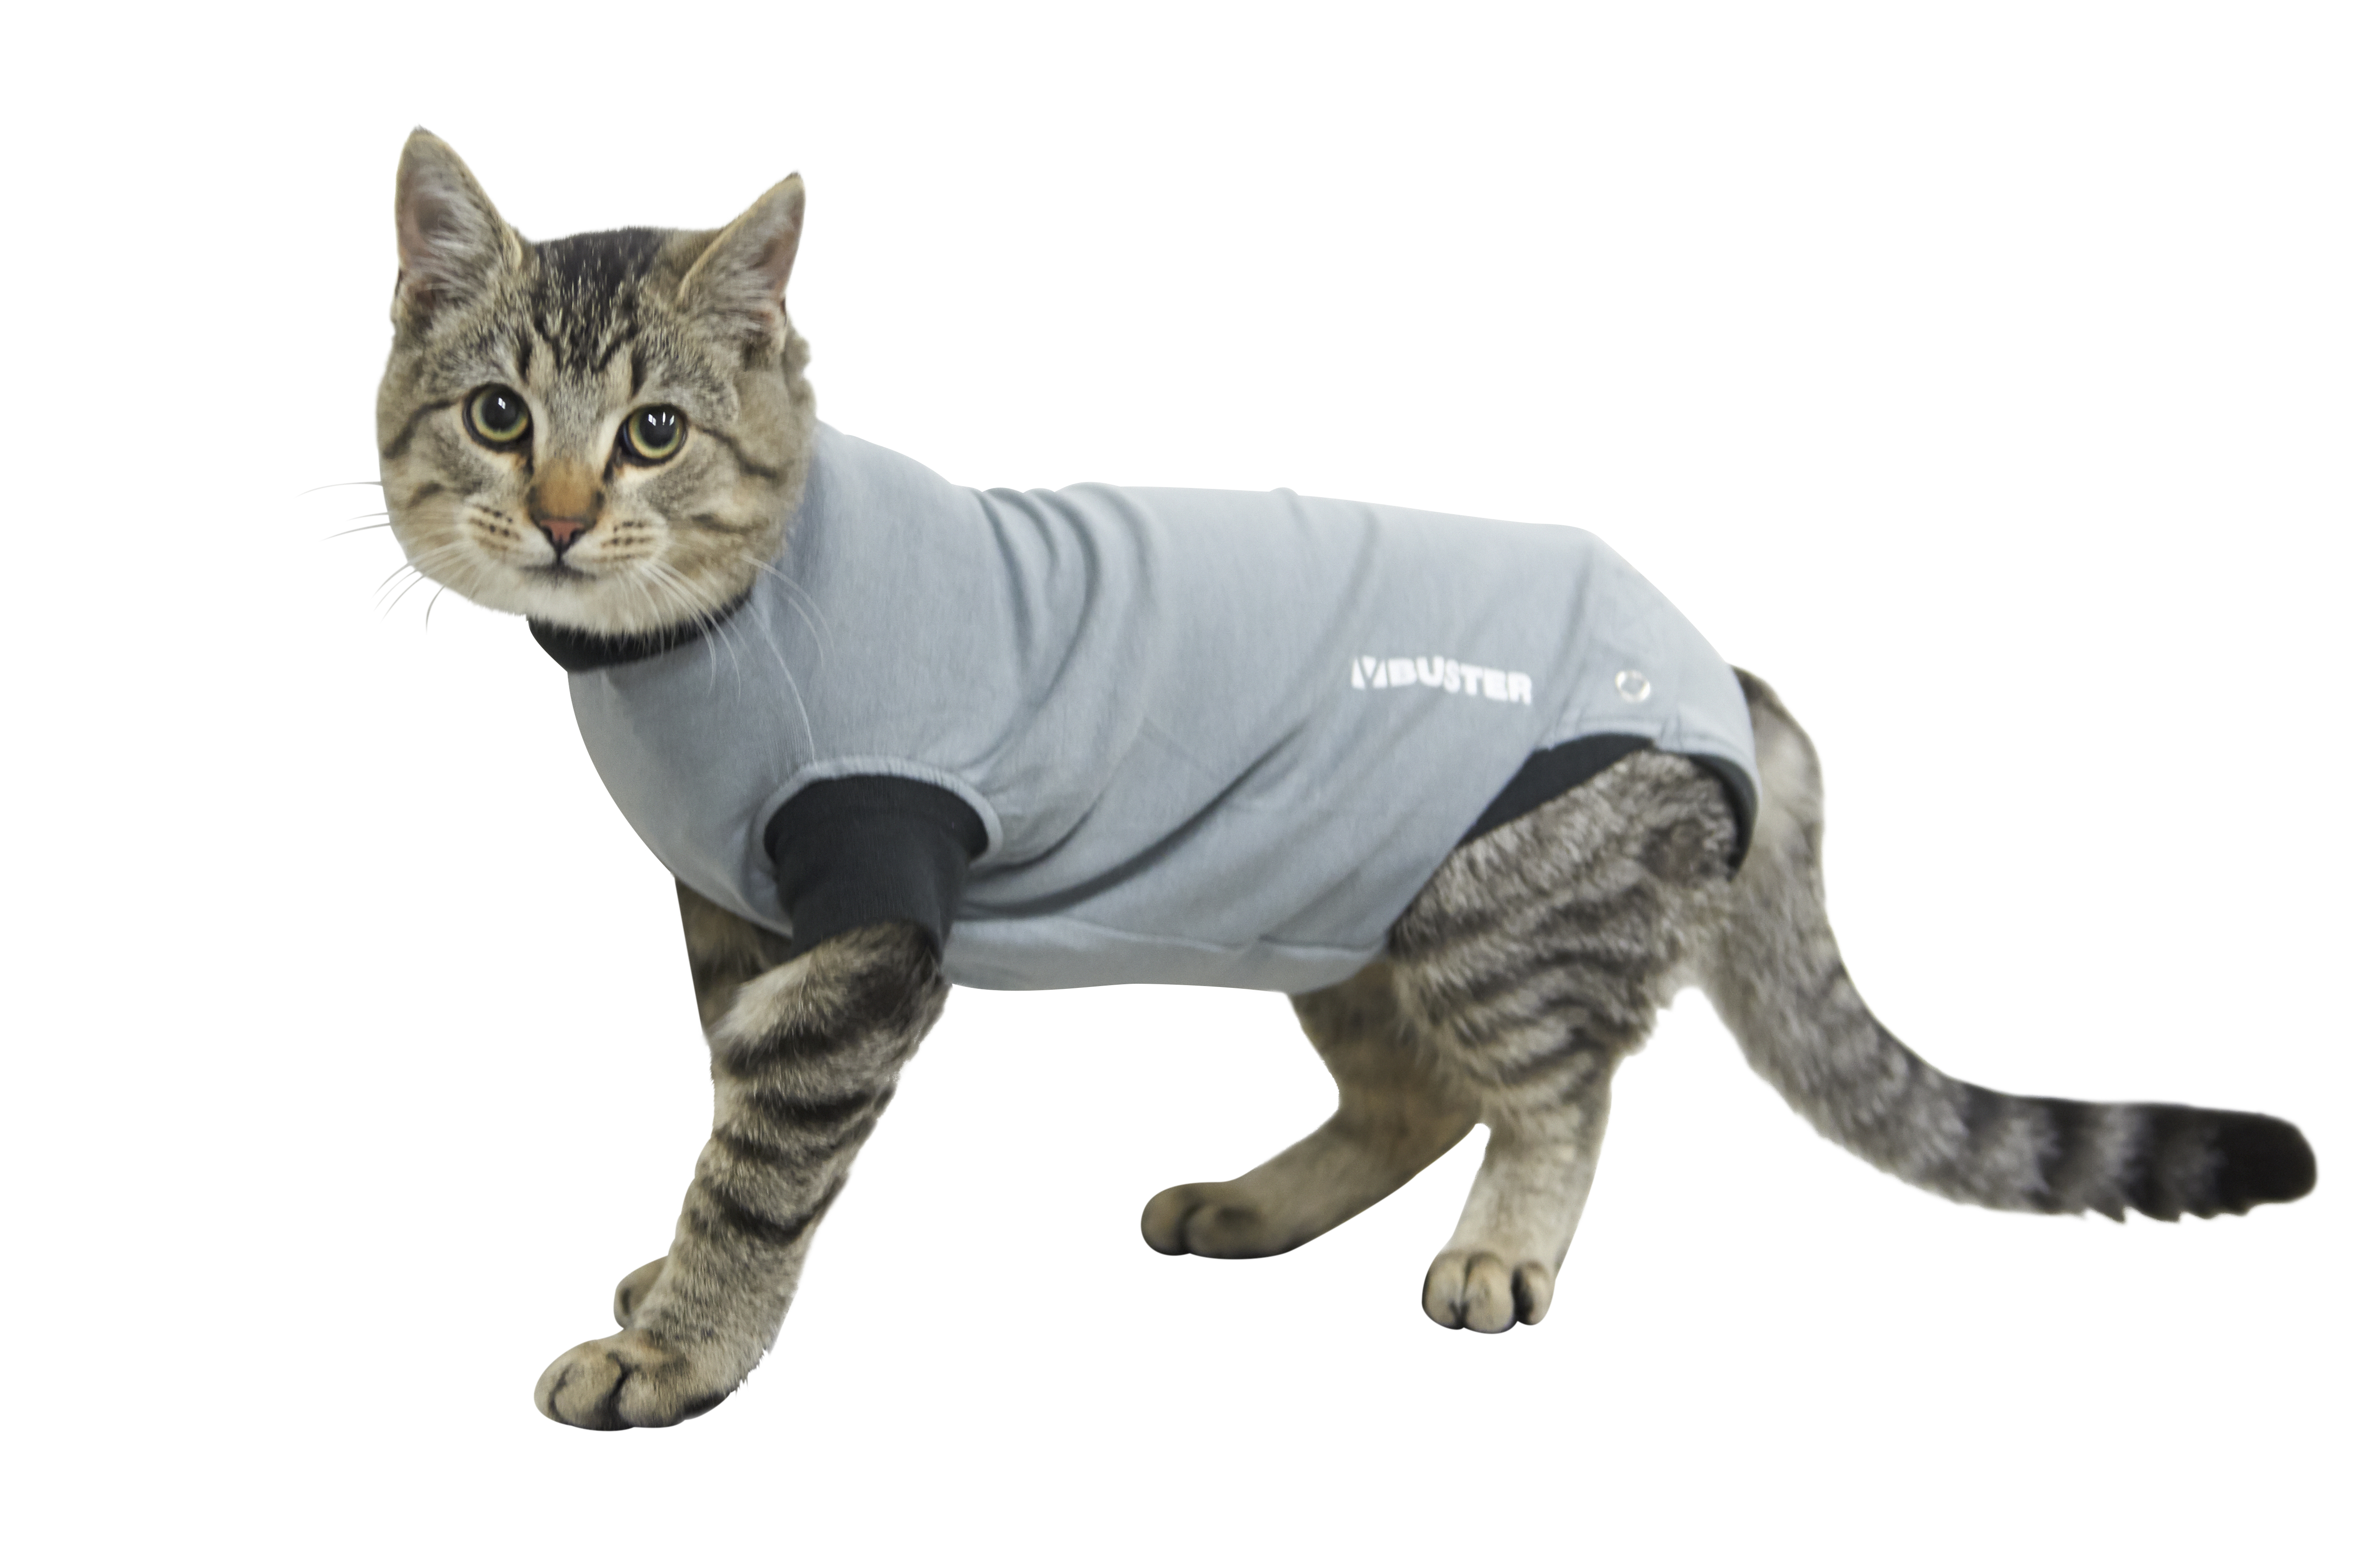 BUSTER Body Suit EasyGo for cats, grey/black, 43,5 cm, size S